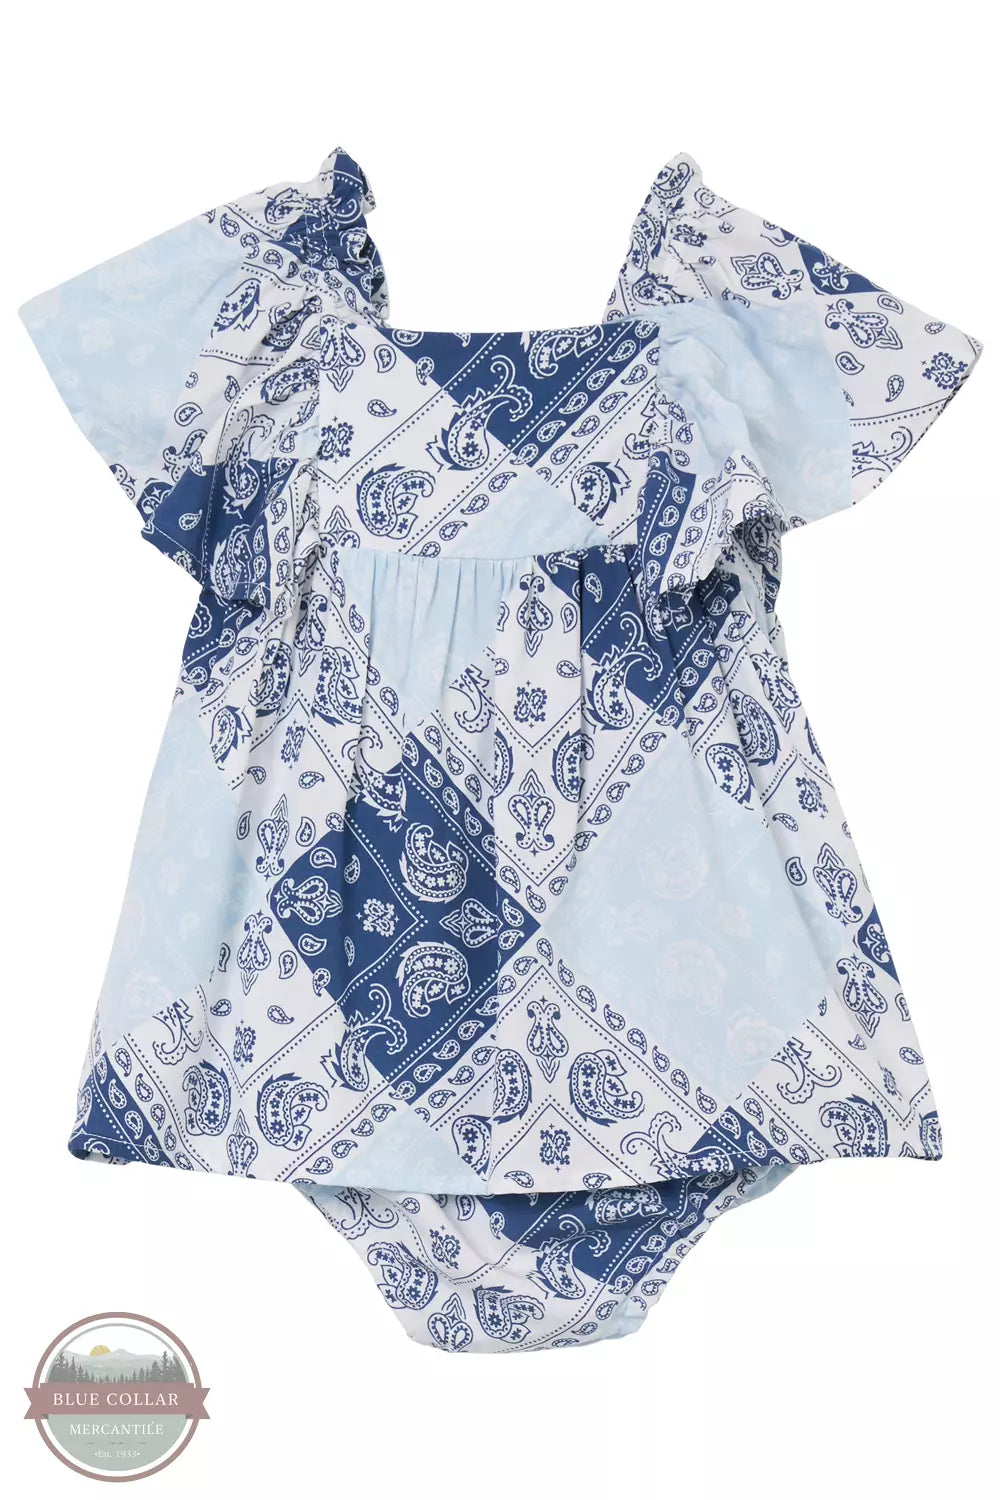 Wrangler 112344318 Infant and Toddler Bandana Print Dress with Diaper Cover Front View